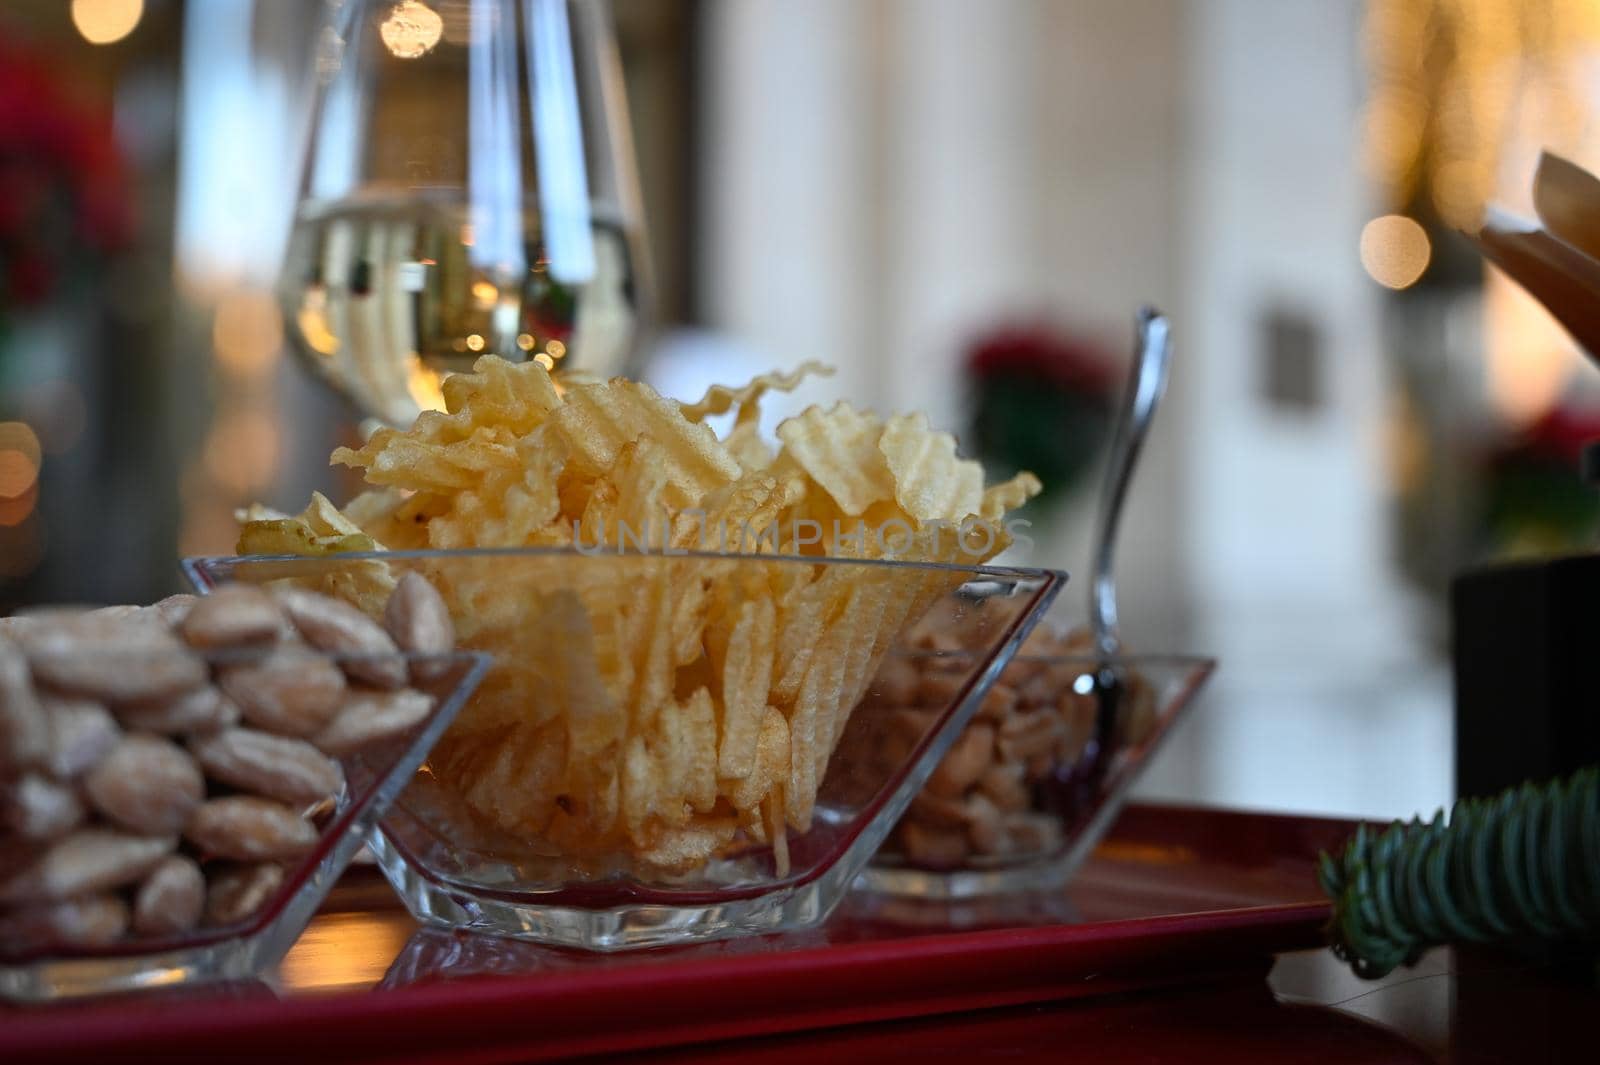 Some potato chips and nuts with wine glass on a restaurant table.